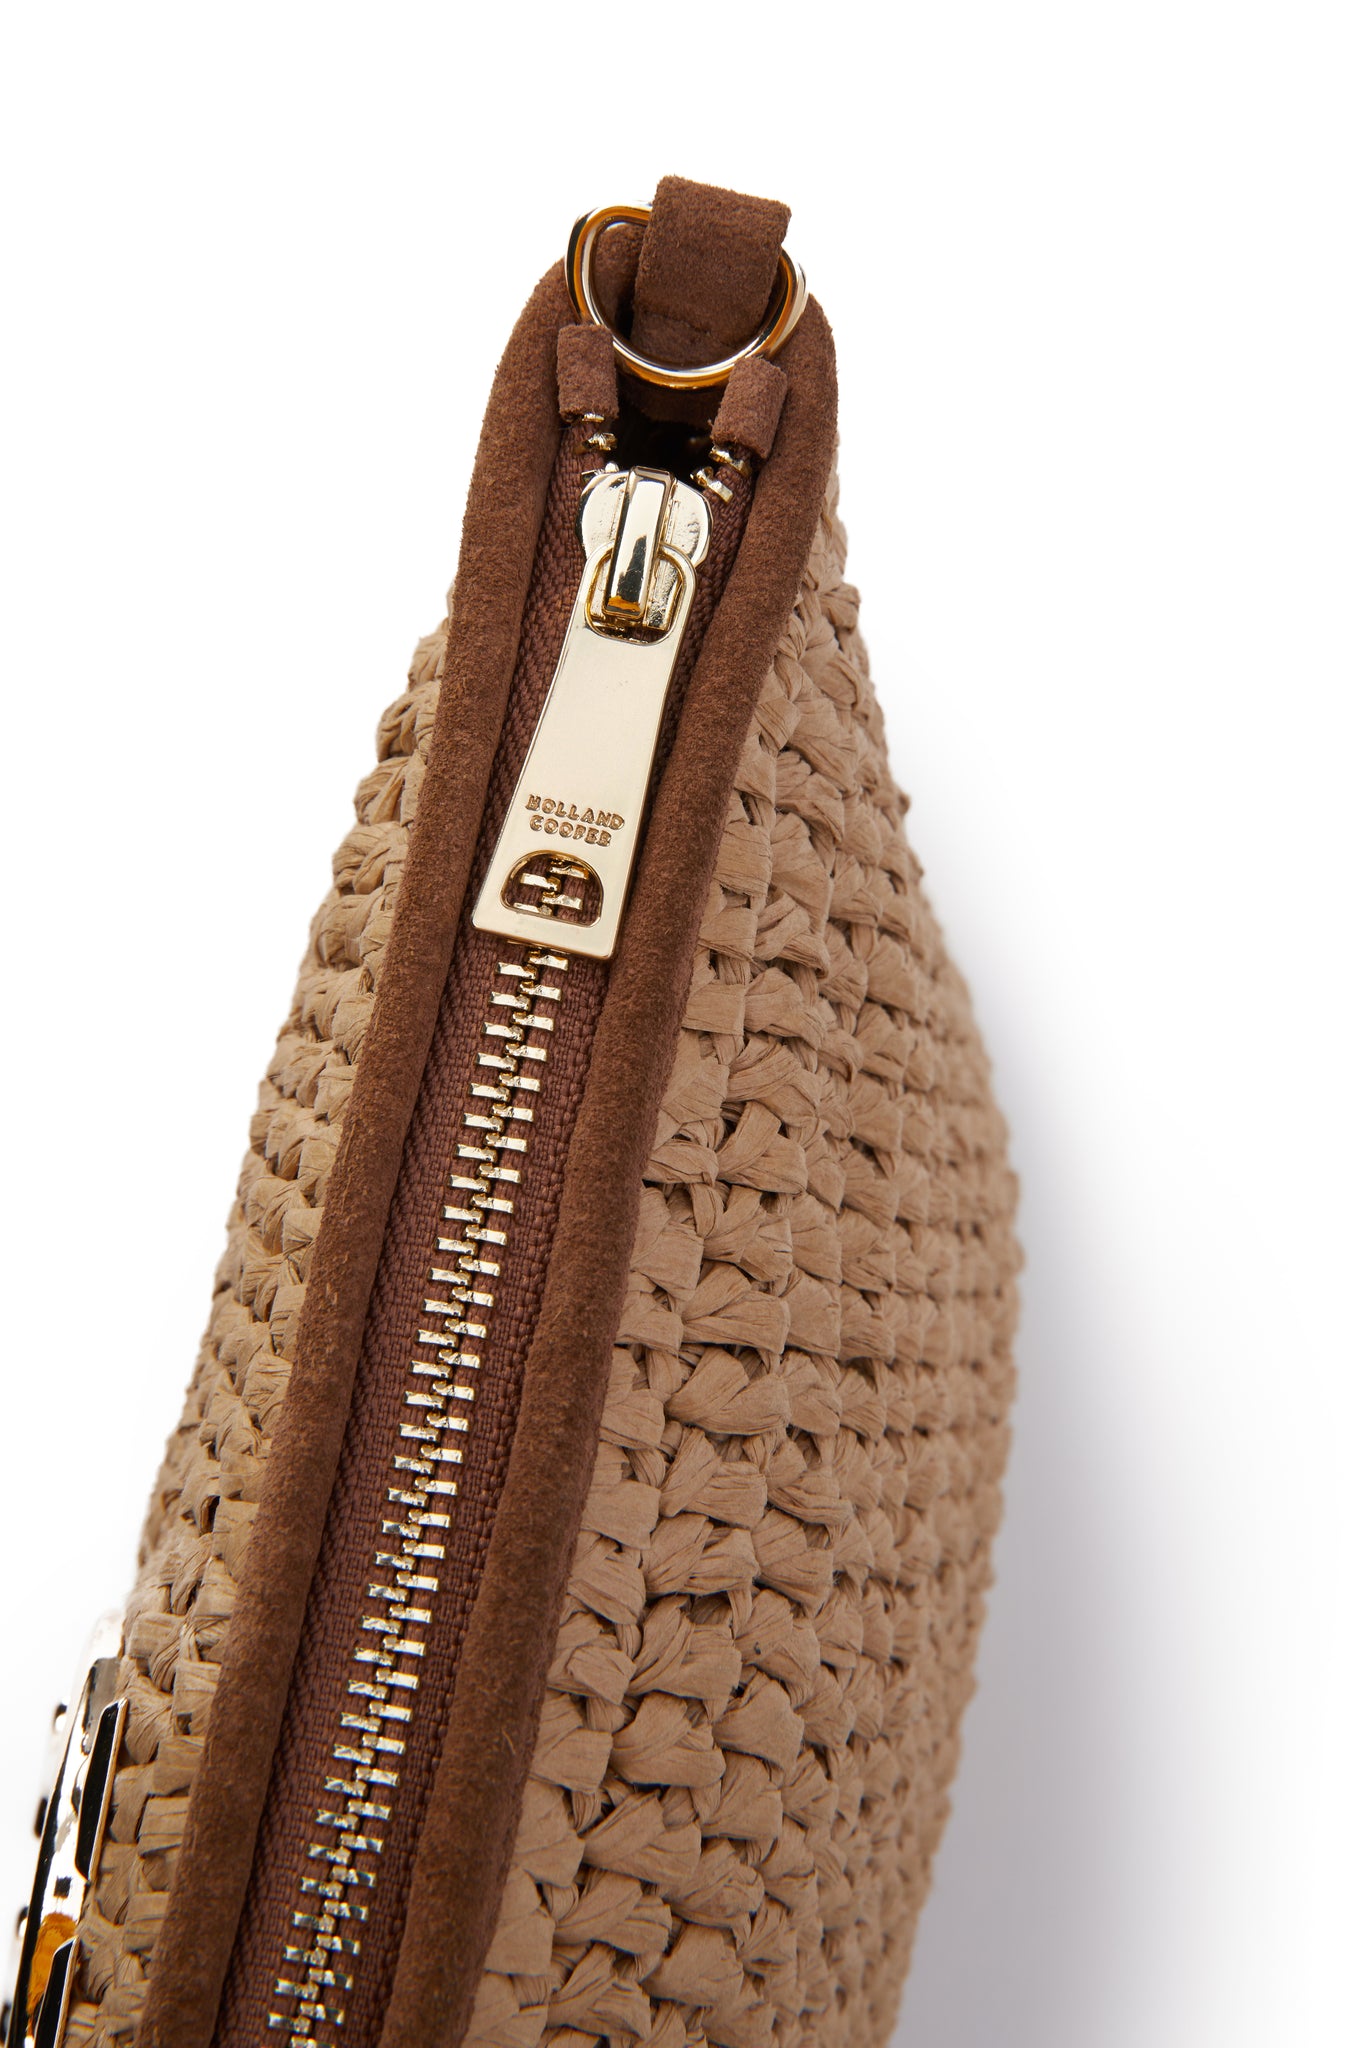 Holland Cooper Riviera Clutch Bag - Size: OS - Natural - Womens